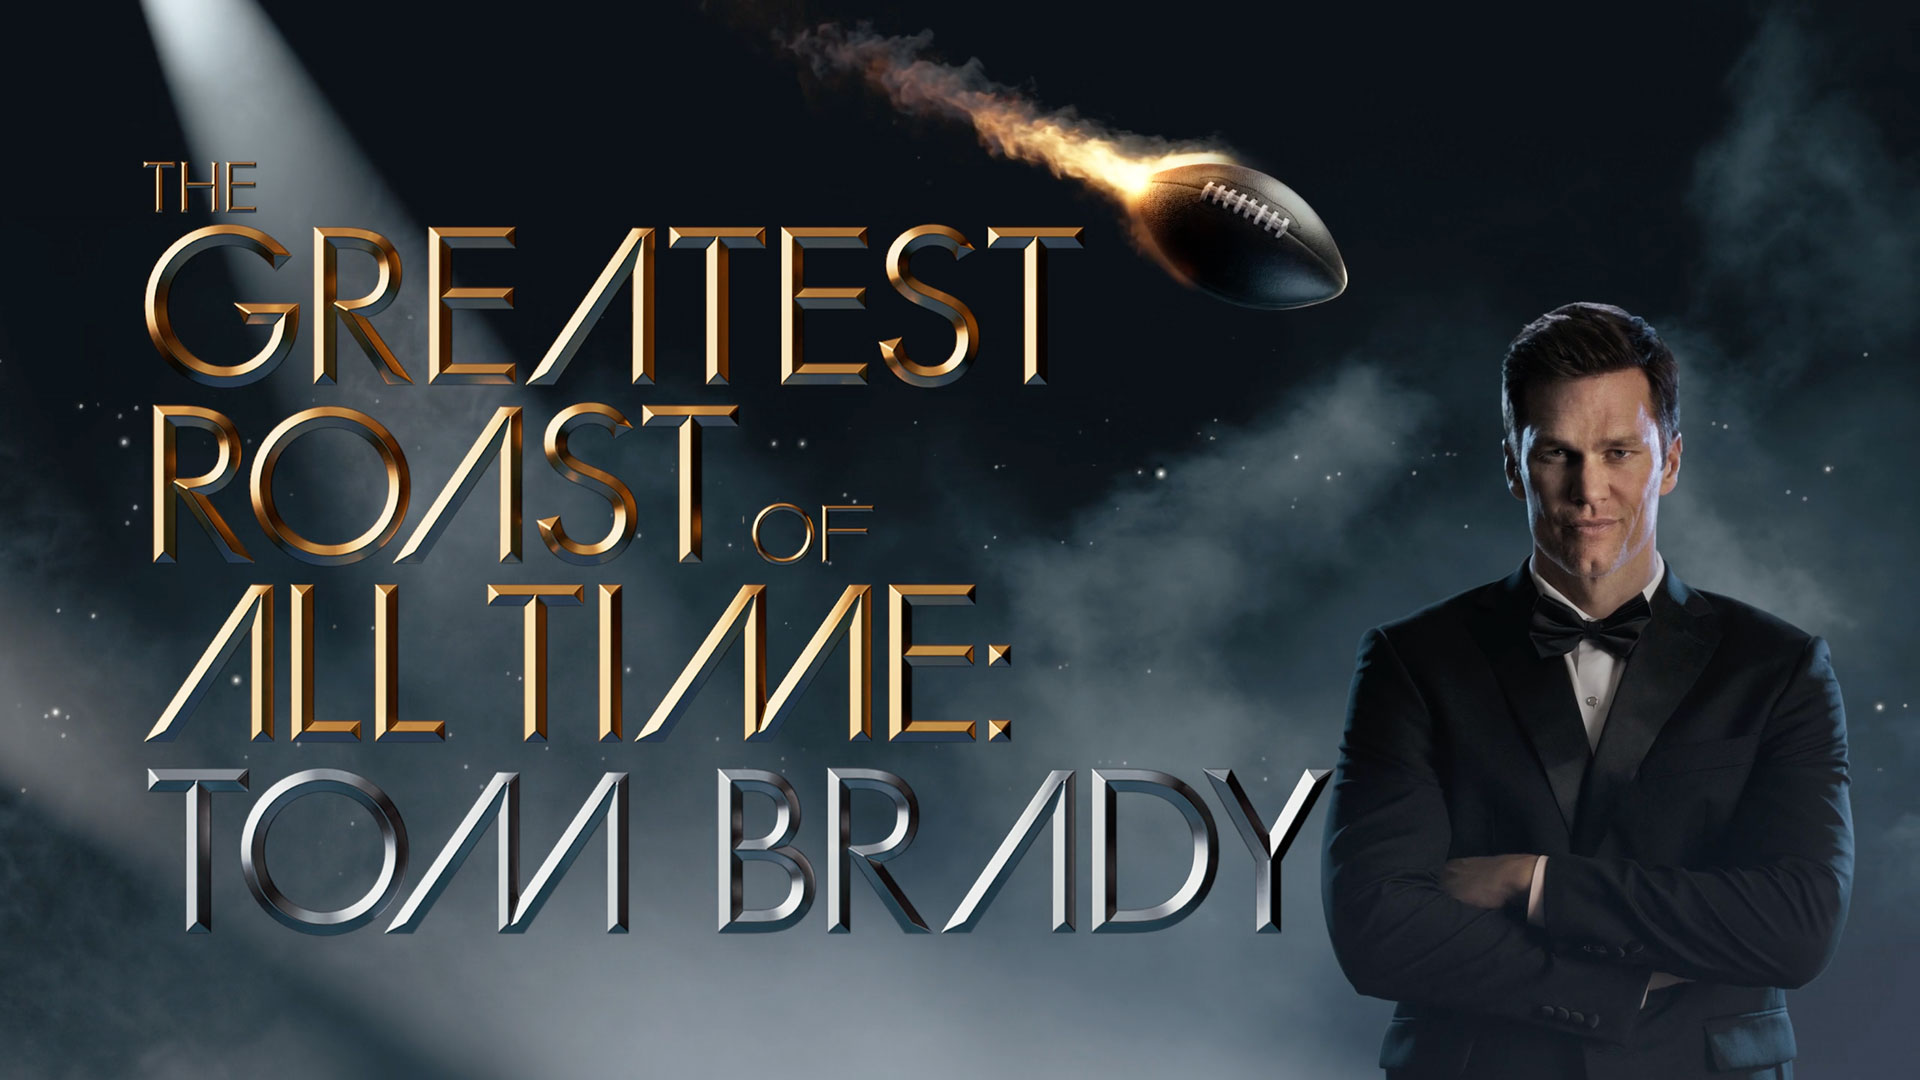 Imaginary Forces Sets the Stage for Roasting Tom Brady – Motion design [Video]